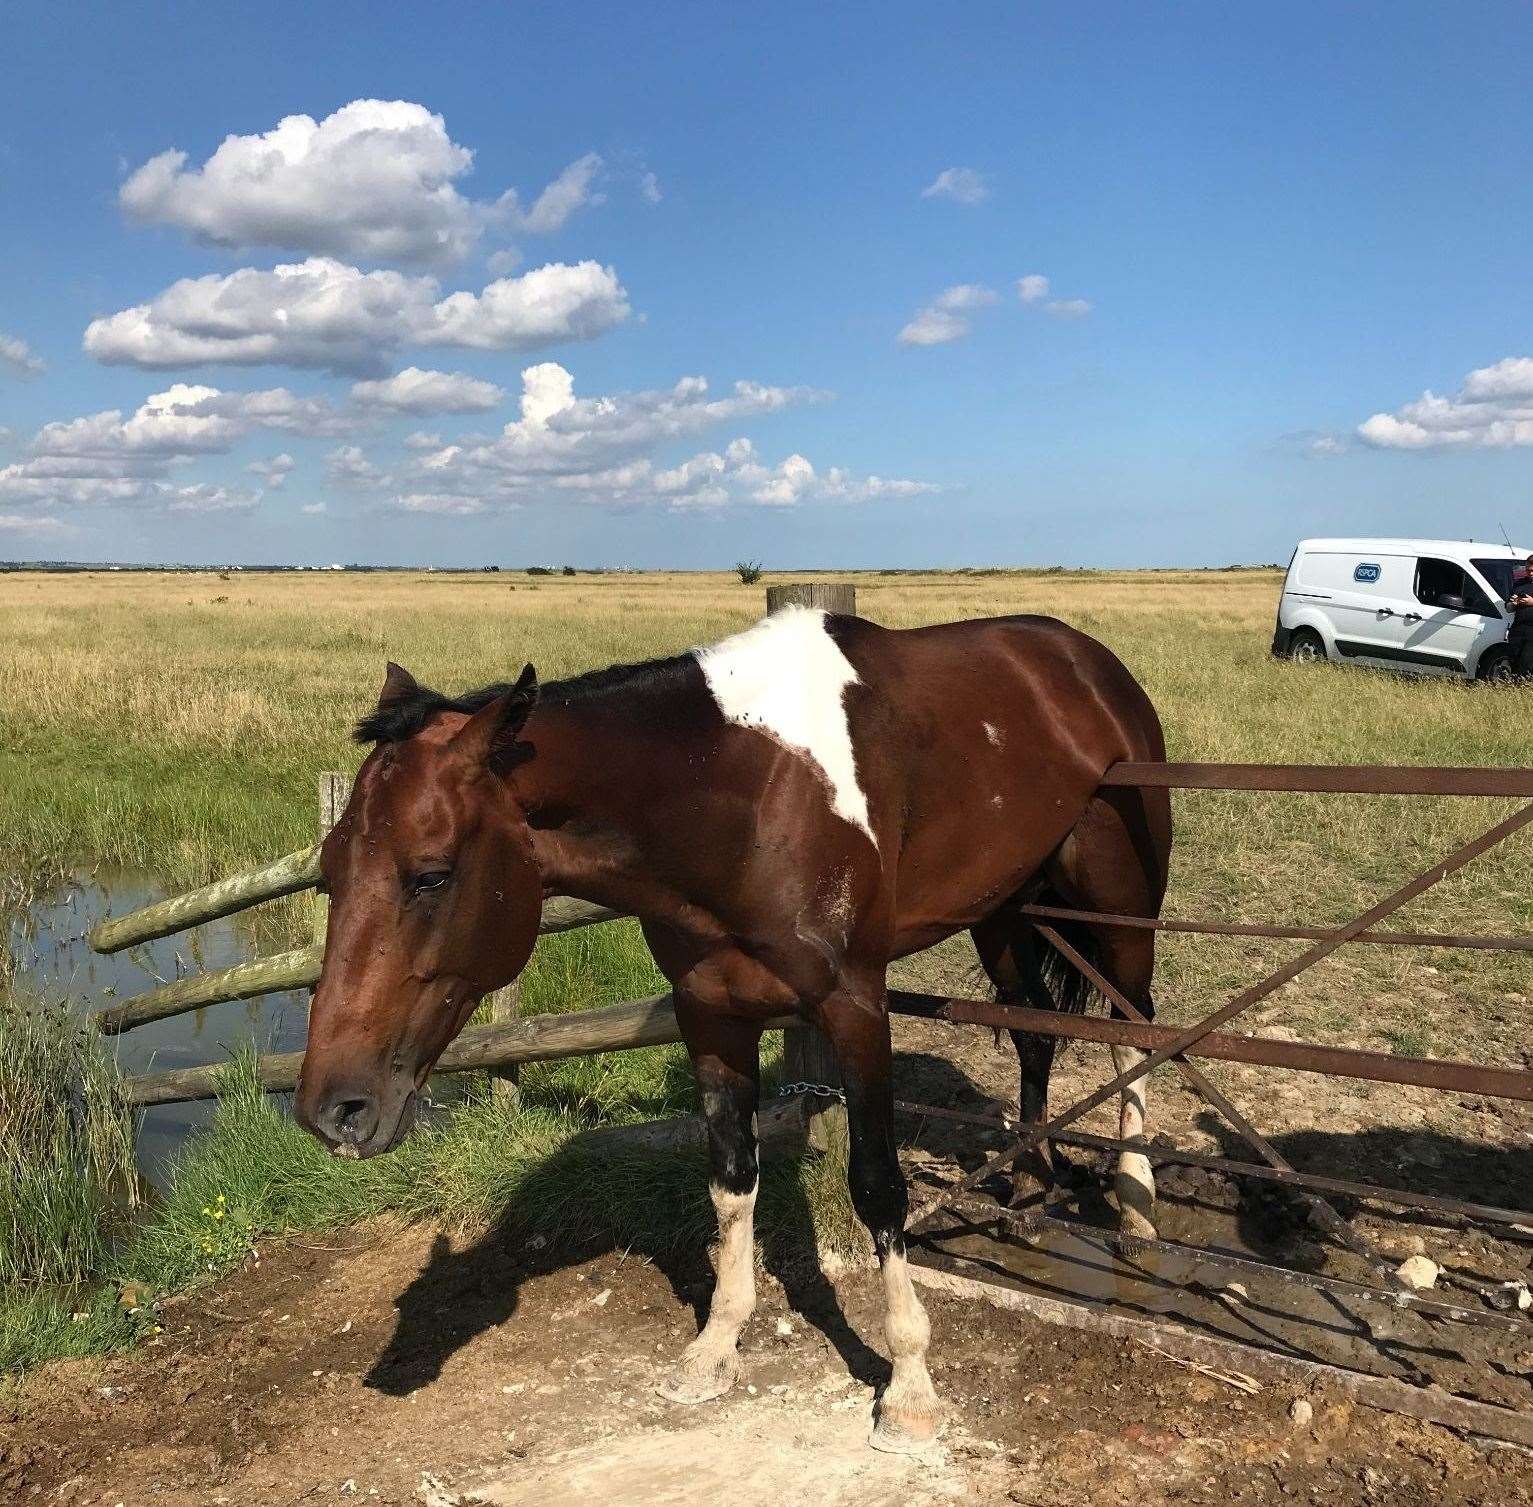 A horse was rescued after getting stuck while trying to get over a gate at Cliffe Pools nature reserve. Image from RSPCA